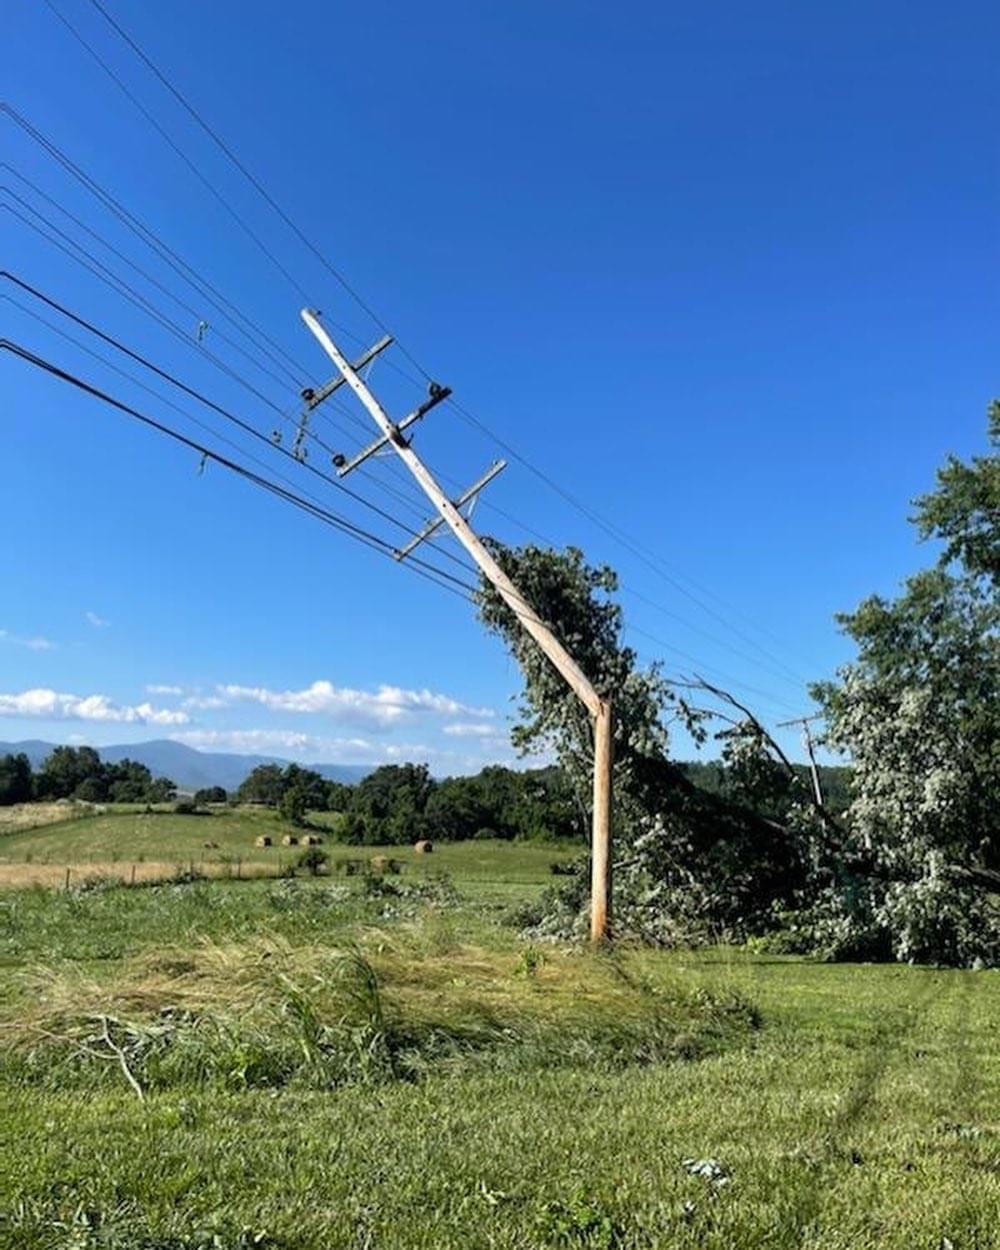 Friday Storms Bring Widespread Power Outages Across BARC's Service Territory